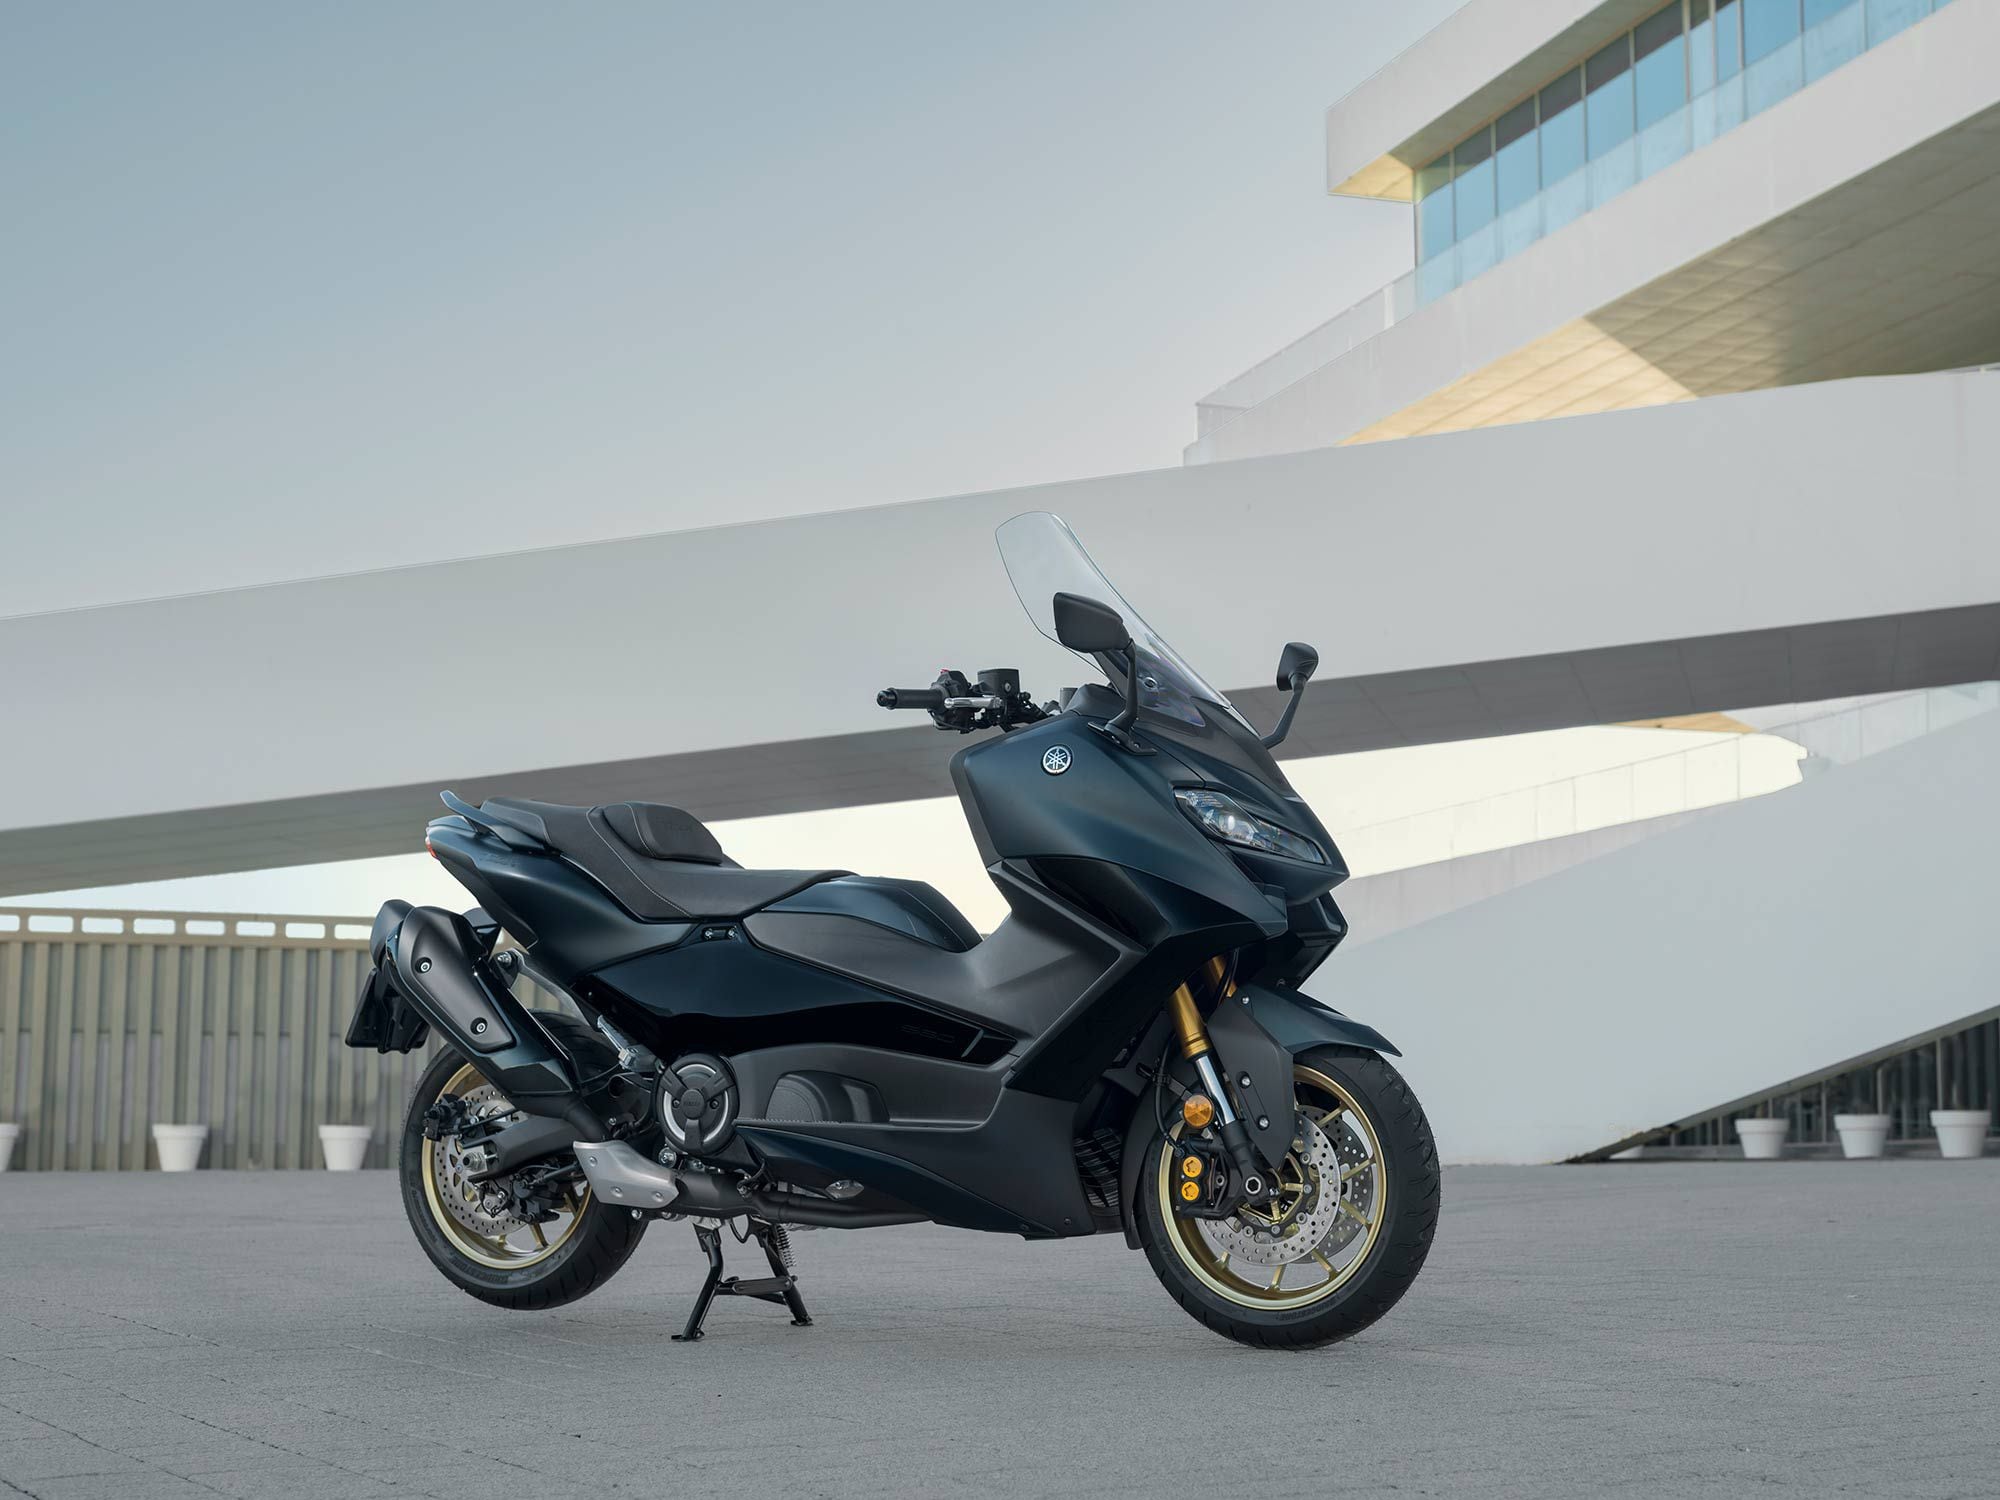 For 2022 The TMAX Tech Max gets a fresh look with new tech and connectivity.